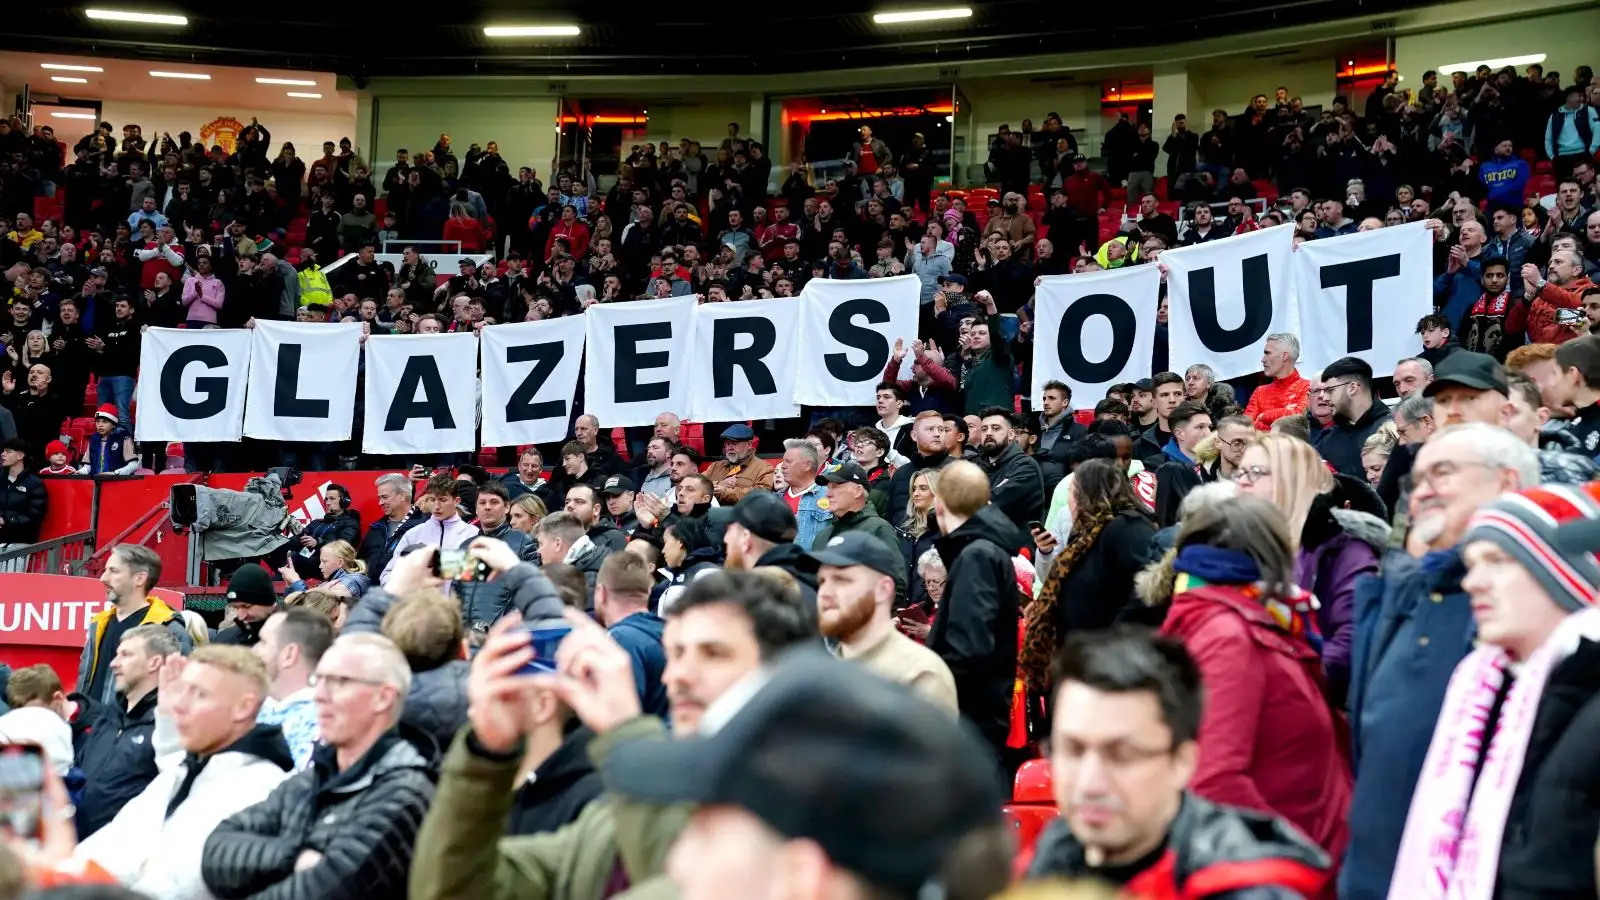 Man United takeover: Who are the bidders who want to buy Man Utd from the  Glazers?